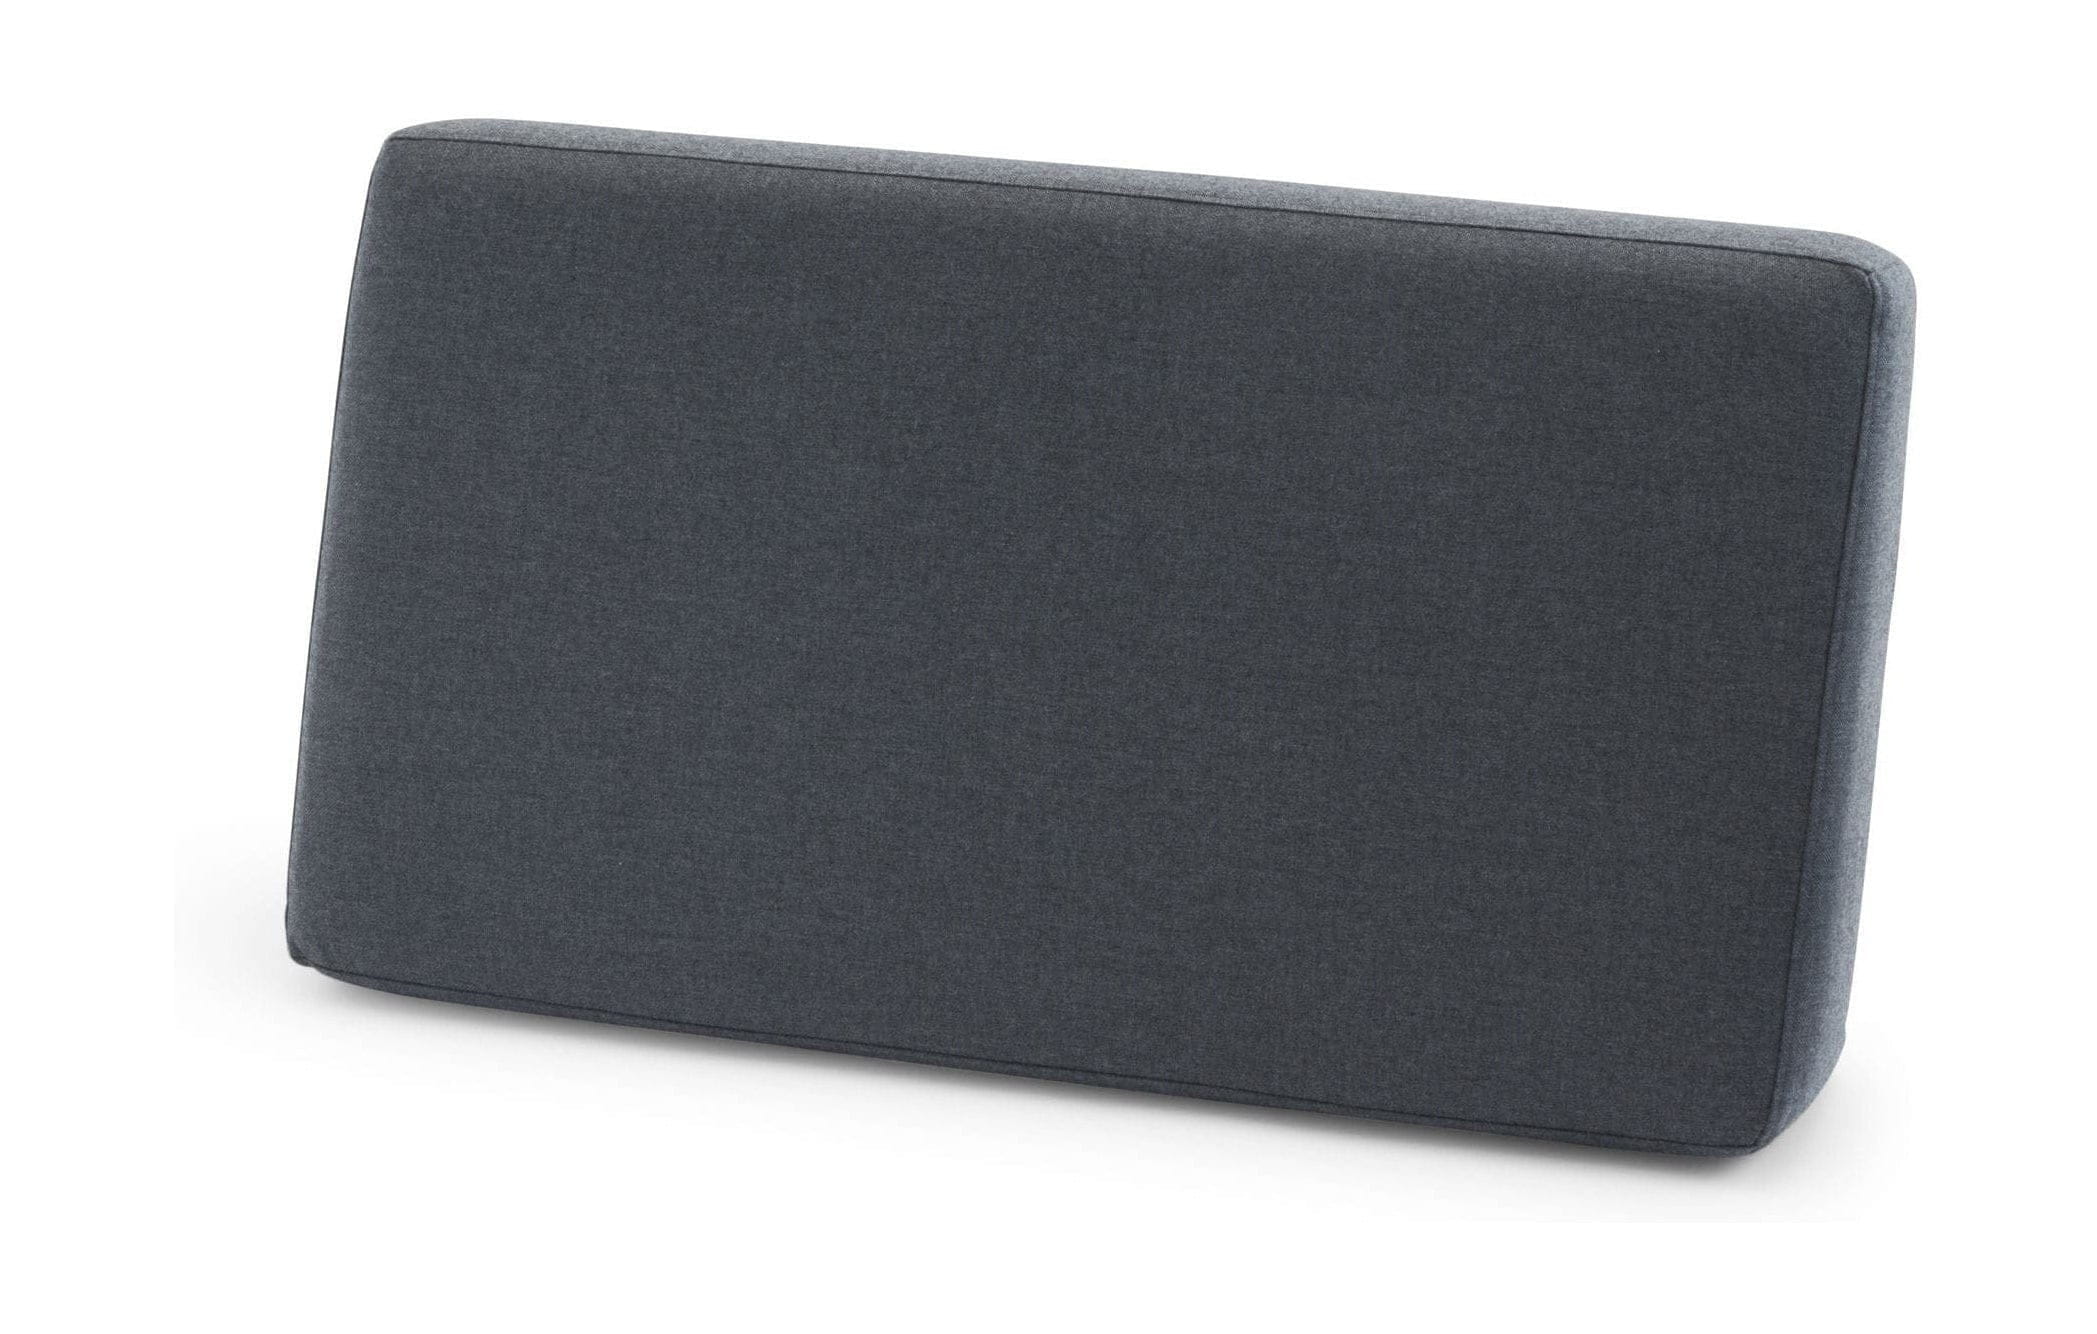 Skagerak Seat Cushion For Tradition Middle Module/Lounge Chair, Charcoal